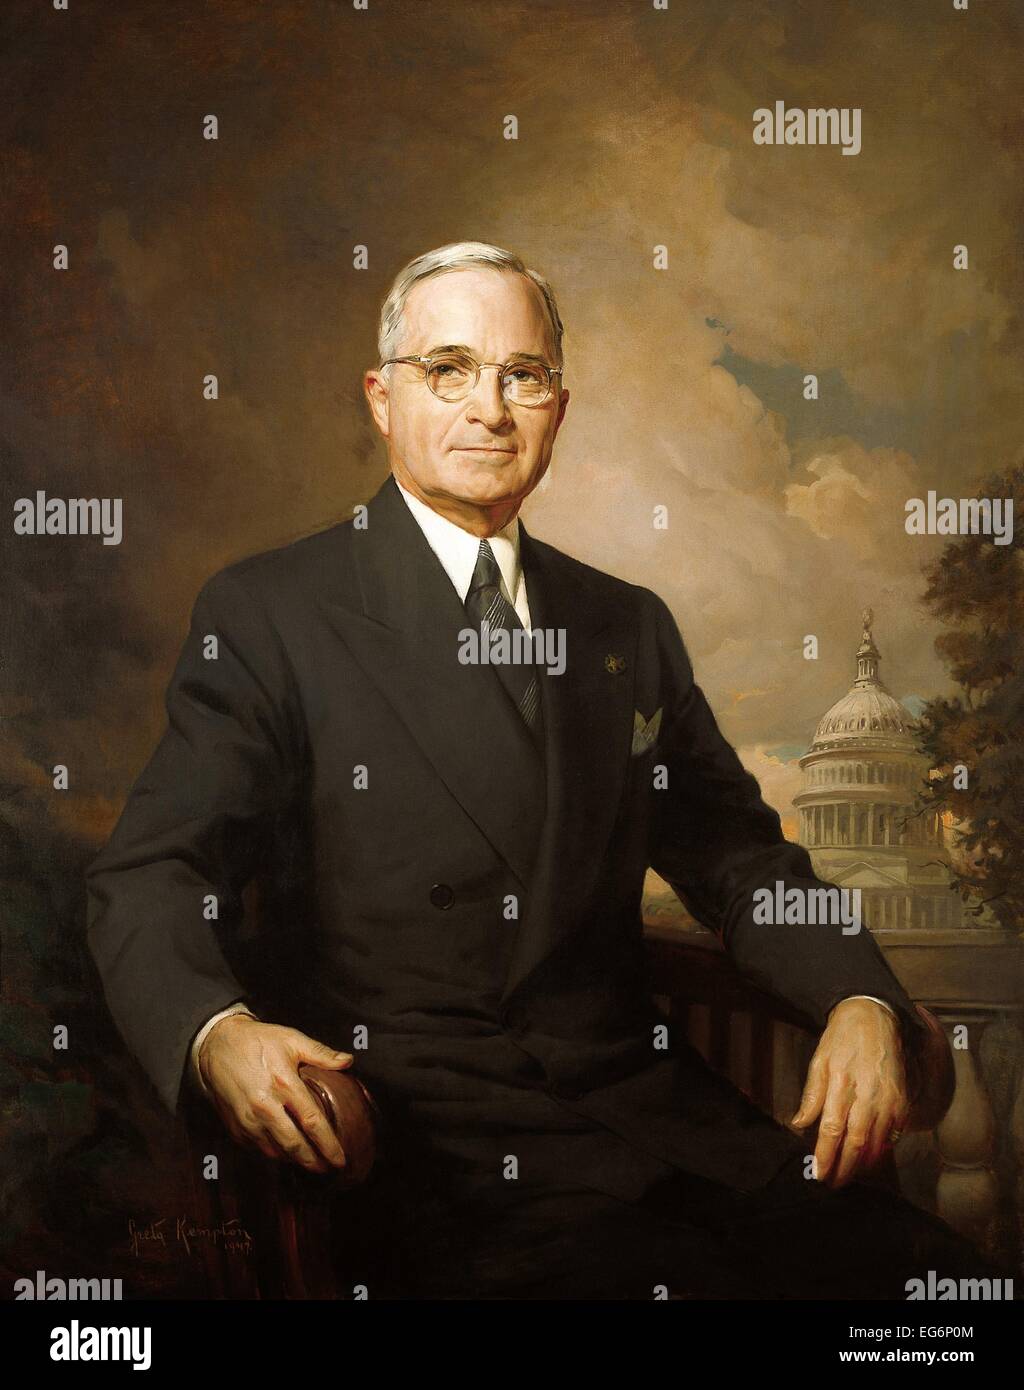 1948 portrait of Harry Truman painted by Greta Kempton. The portrait was used in 1948 on the official re-election campaign Stock Photo